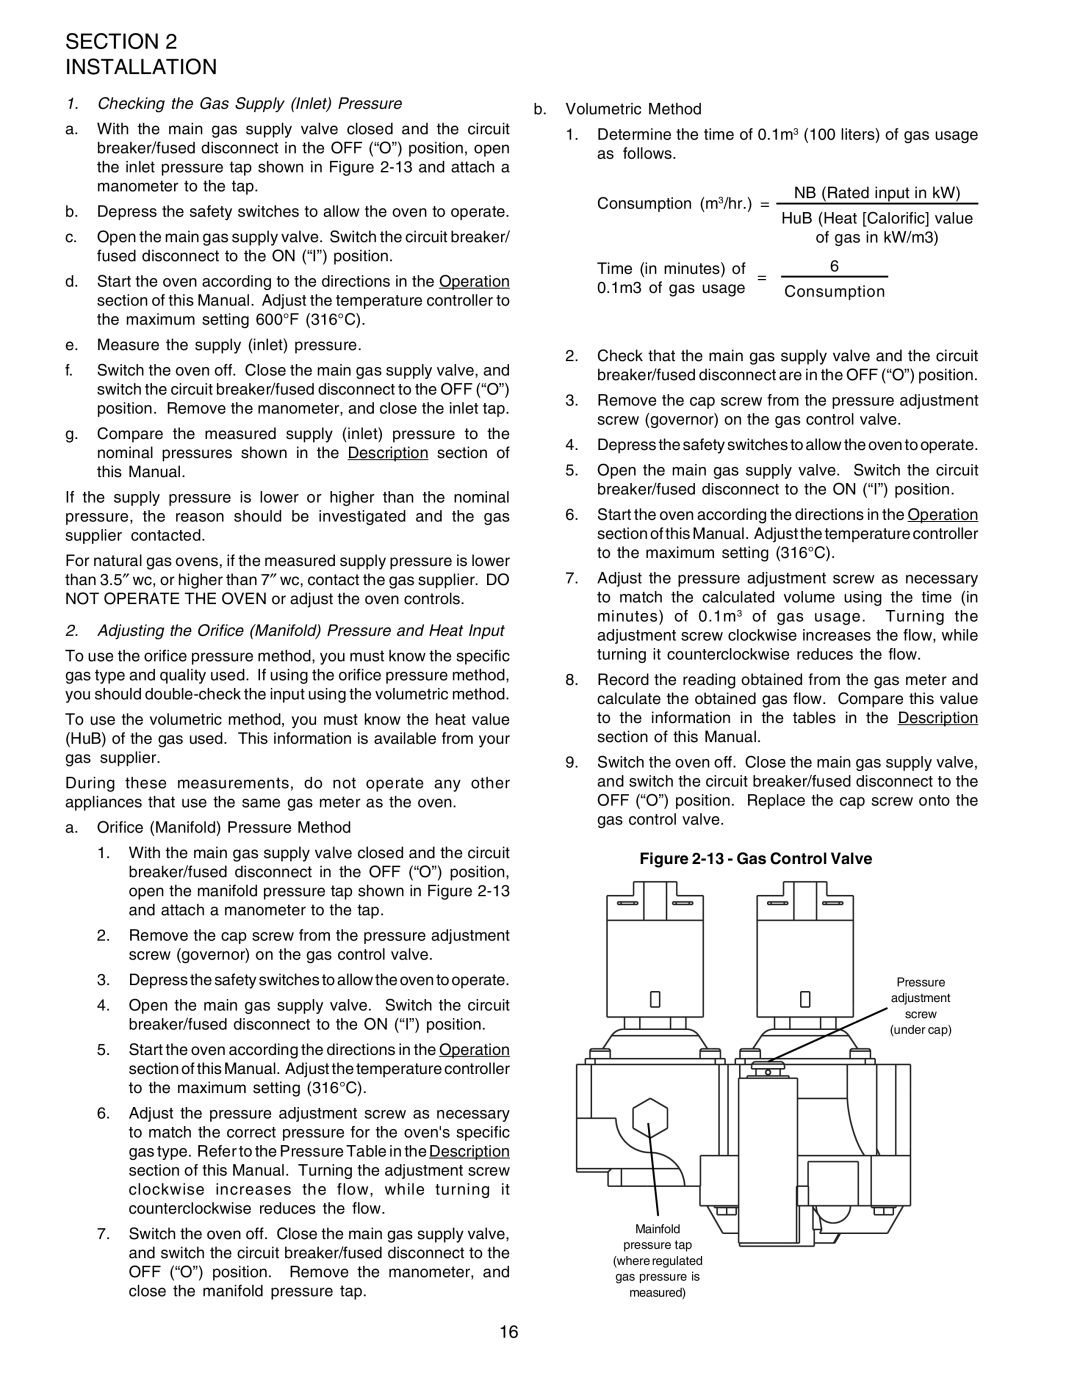 Middleby Marshall PS520G installation manual 13- Gas Control Valve 